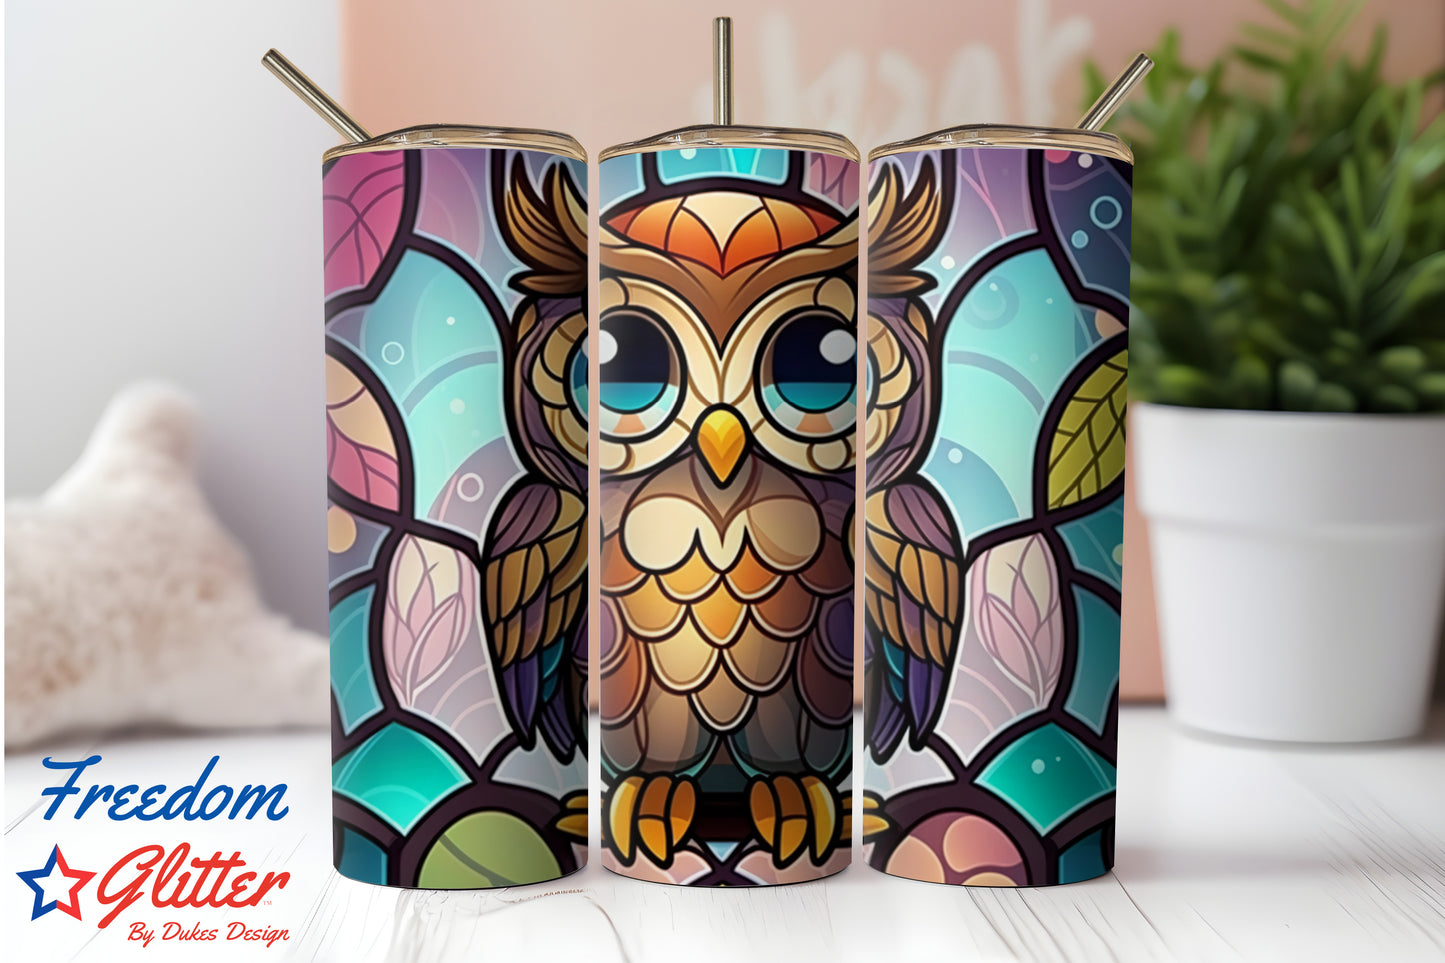 Stained Glass Owl 2 (Printed Vinyl)